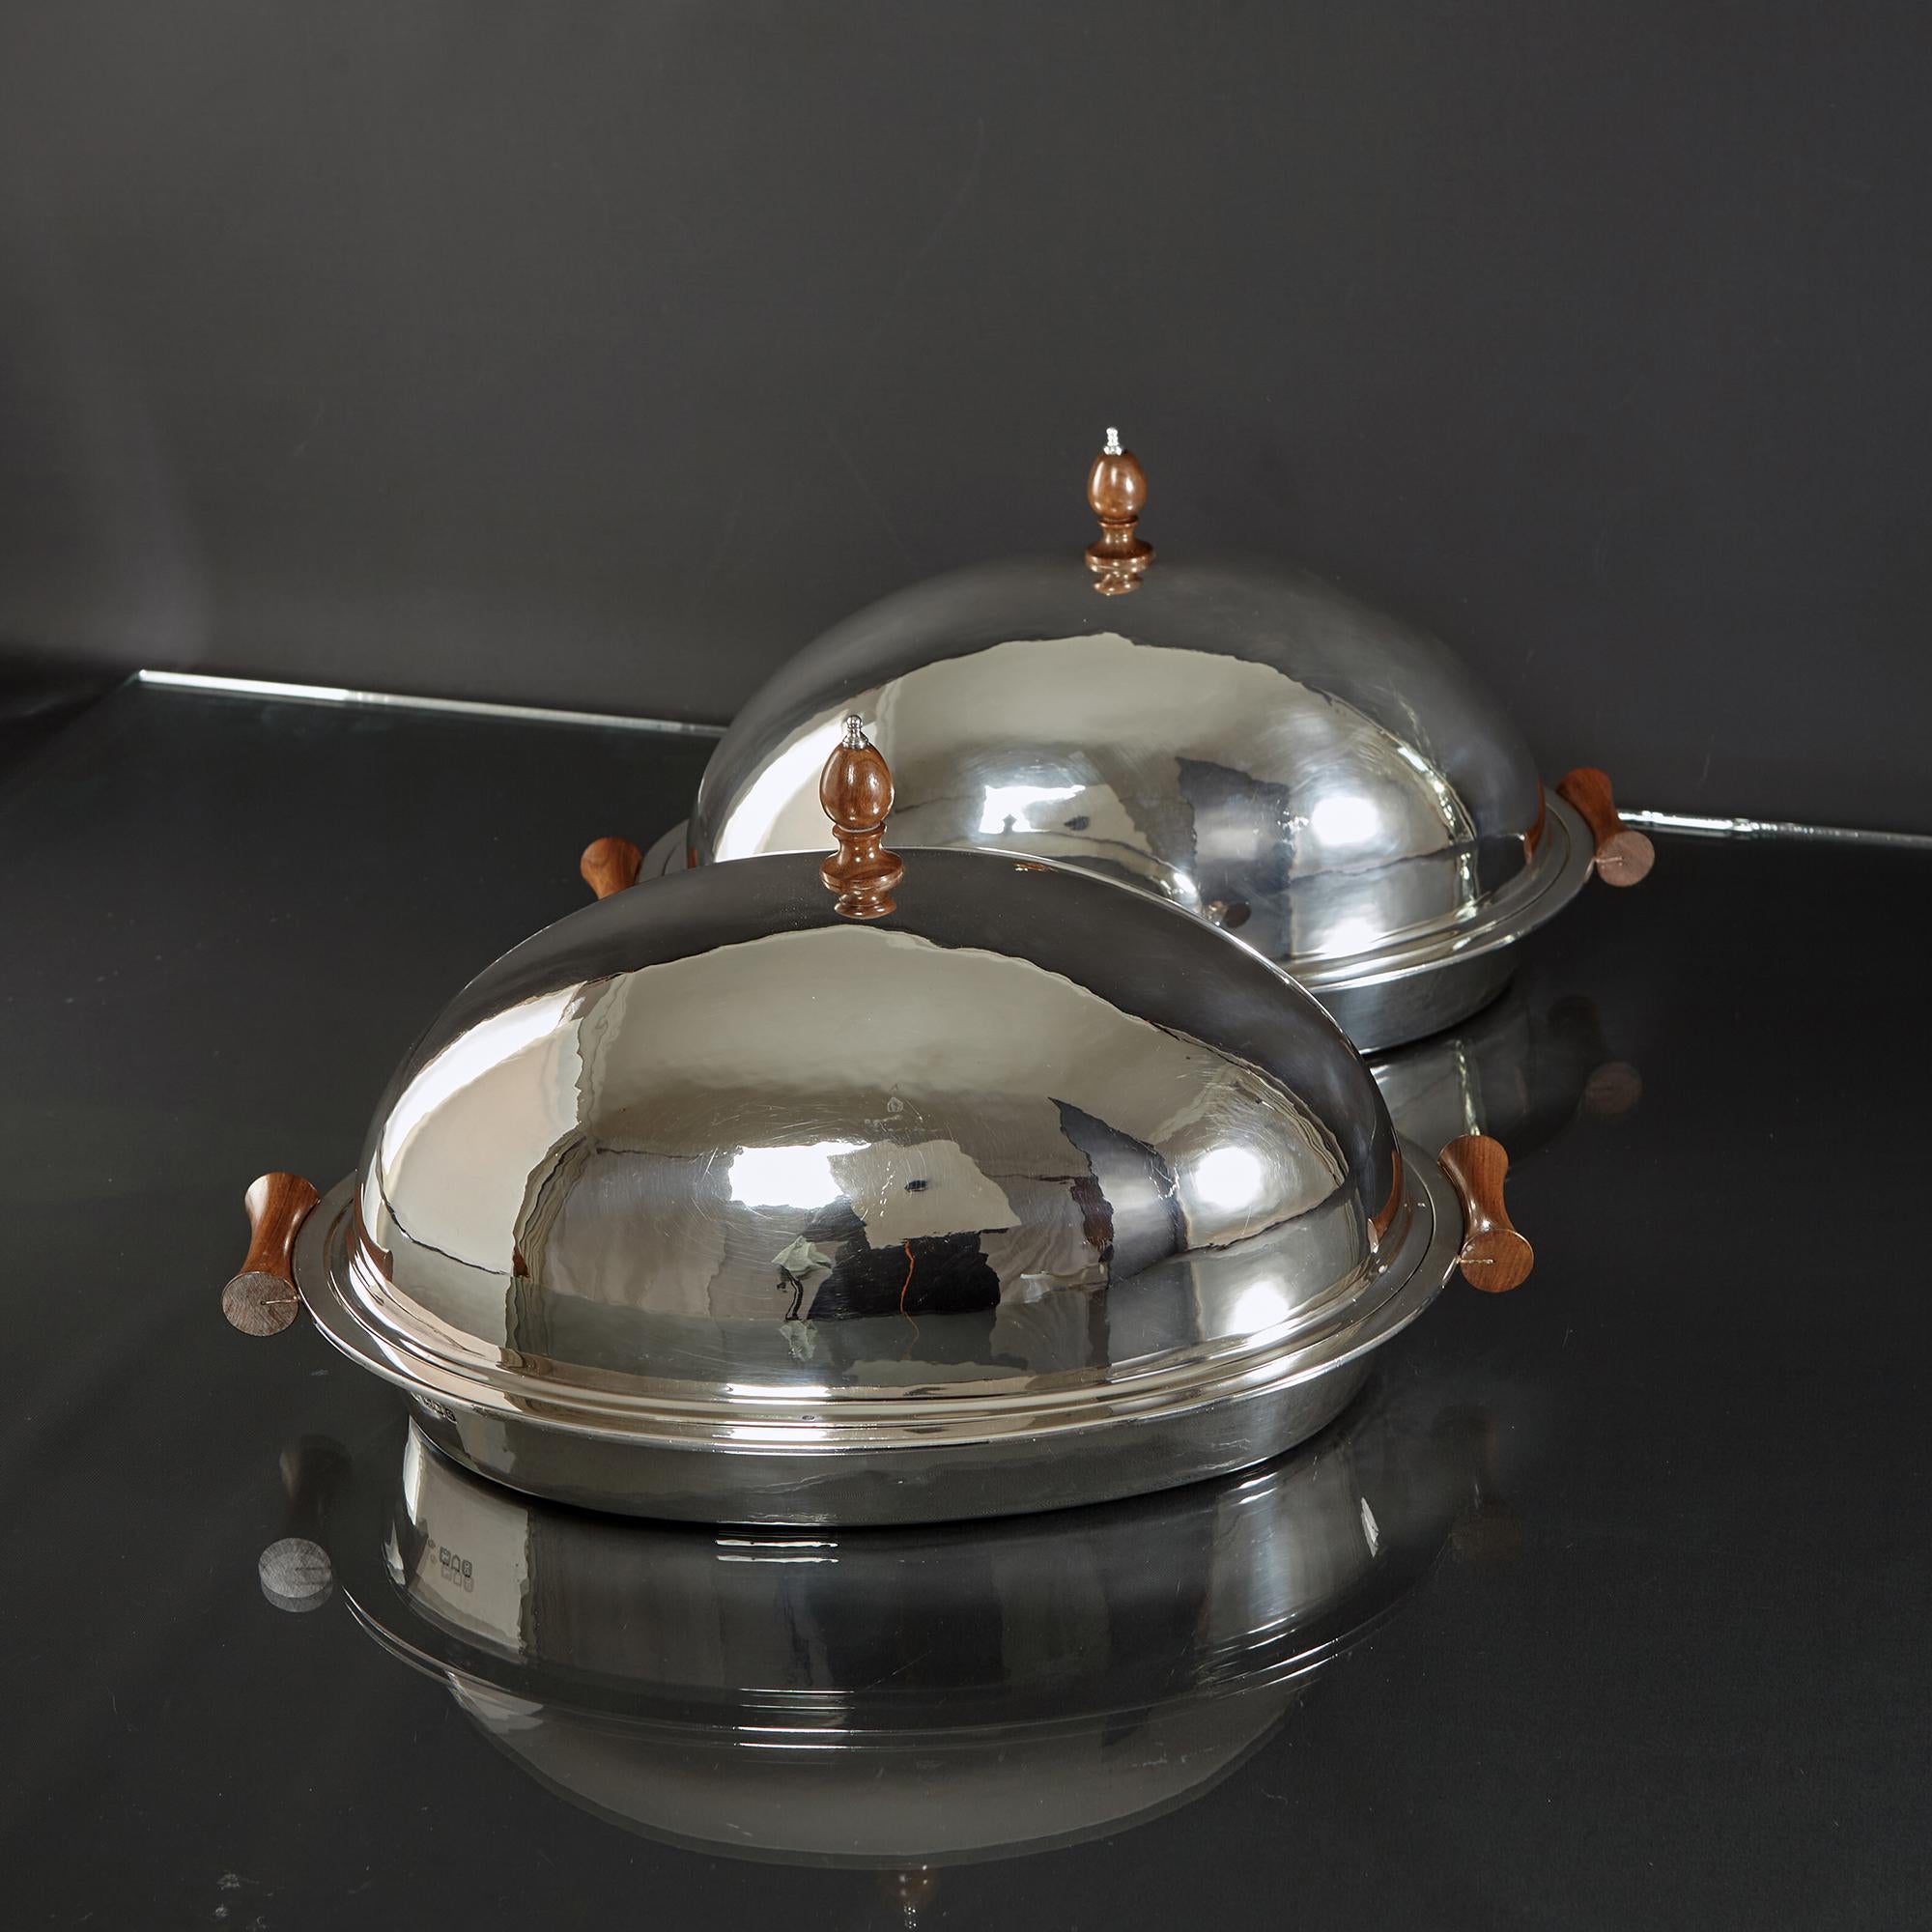 A pair of antique silver game serving dishes and covers. These are quite rare and of a useable size for serving not only game, but also chickens, small roasts and any number of vegetable recipes.

The domed covers and bases are hand raised and the